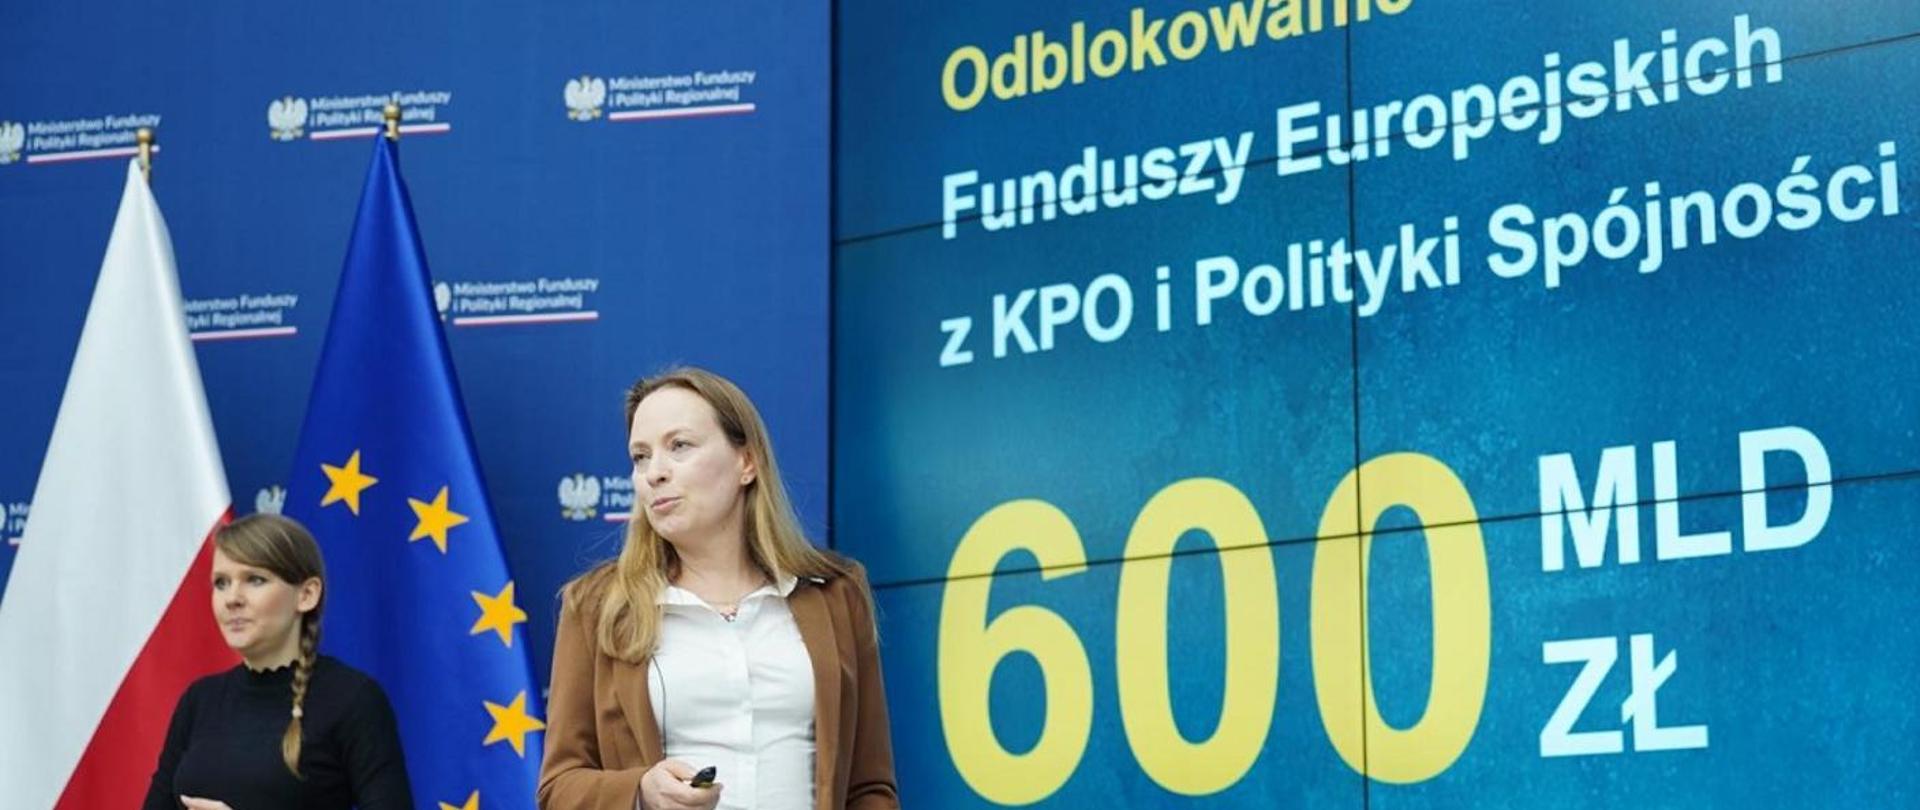 Minister K. Pełczyńska-Nałęcz on 100 days at the MDFRP: we started with a full blockade of EU funds, and now we are at the point where PLN 600 billion is to be invested